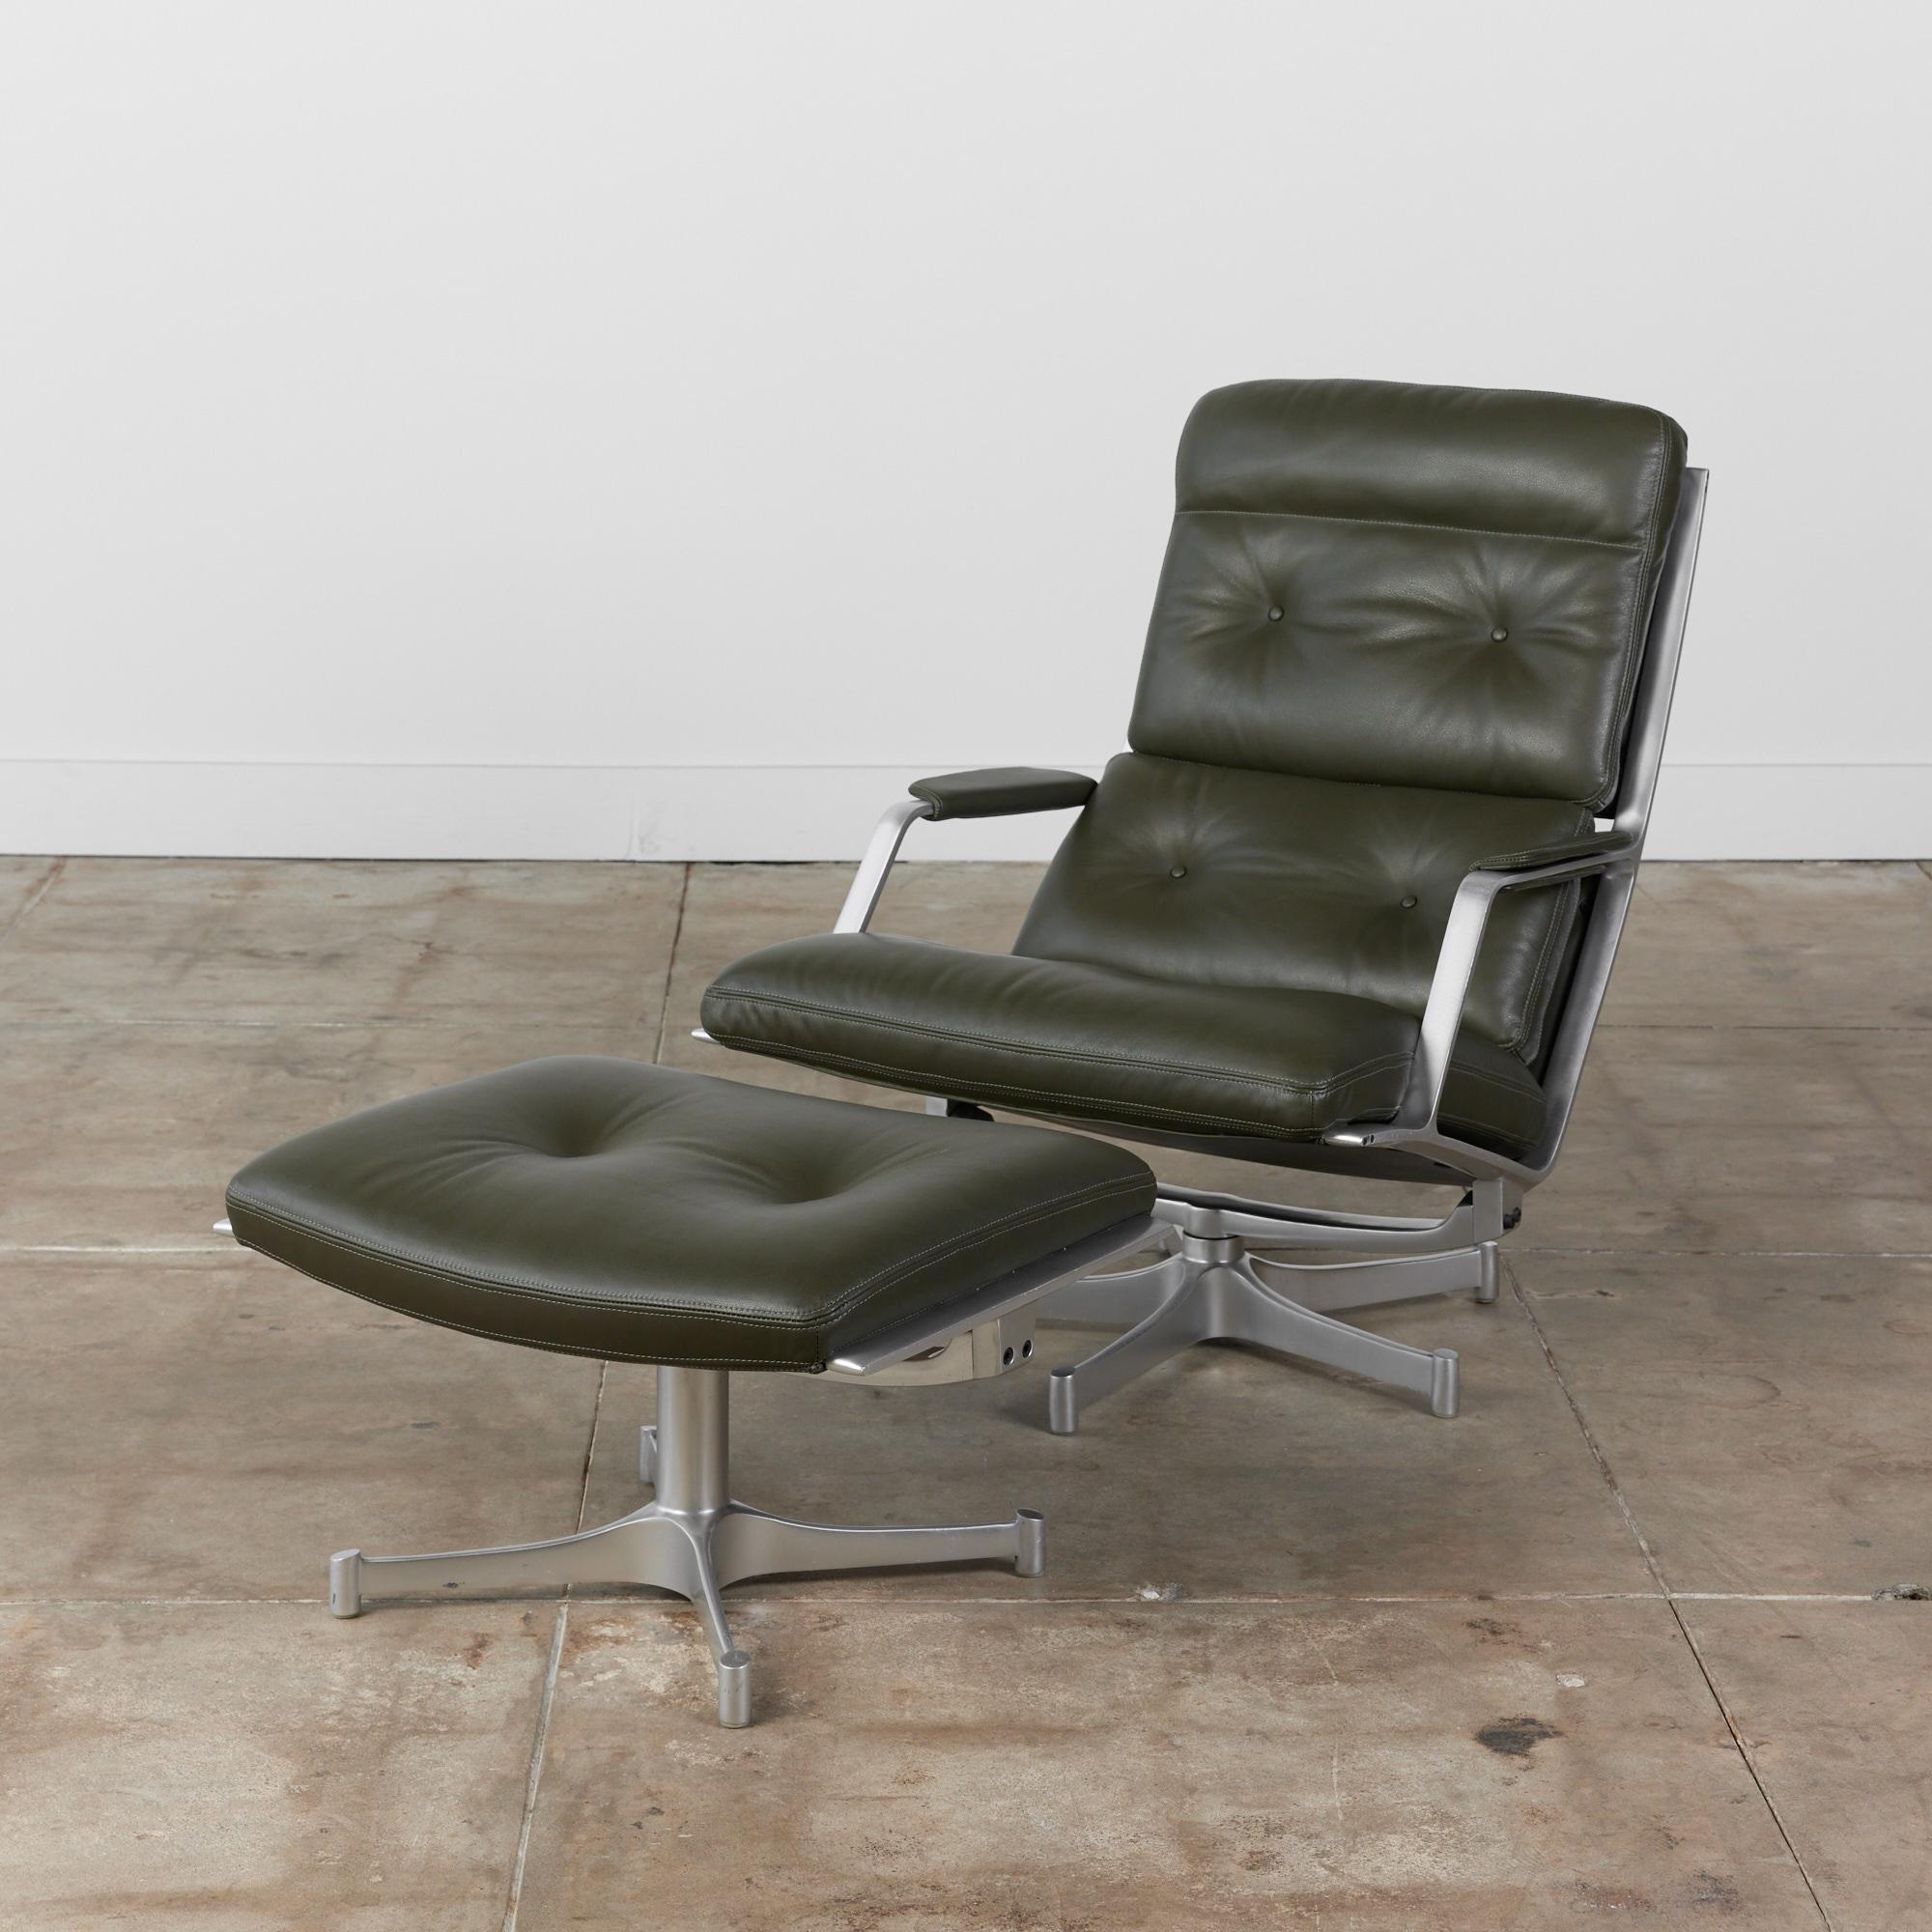 FK85 lounge chair and ottoman by Danish design duo, Preben Fabricius and Jørgen Kastholm, c. 1960s, Germany. The swivel lounge chair and fixed ottoman features a chrome plated steel frame, with new leather upholstery.

Dimensions
Chair: 29